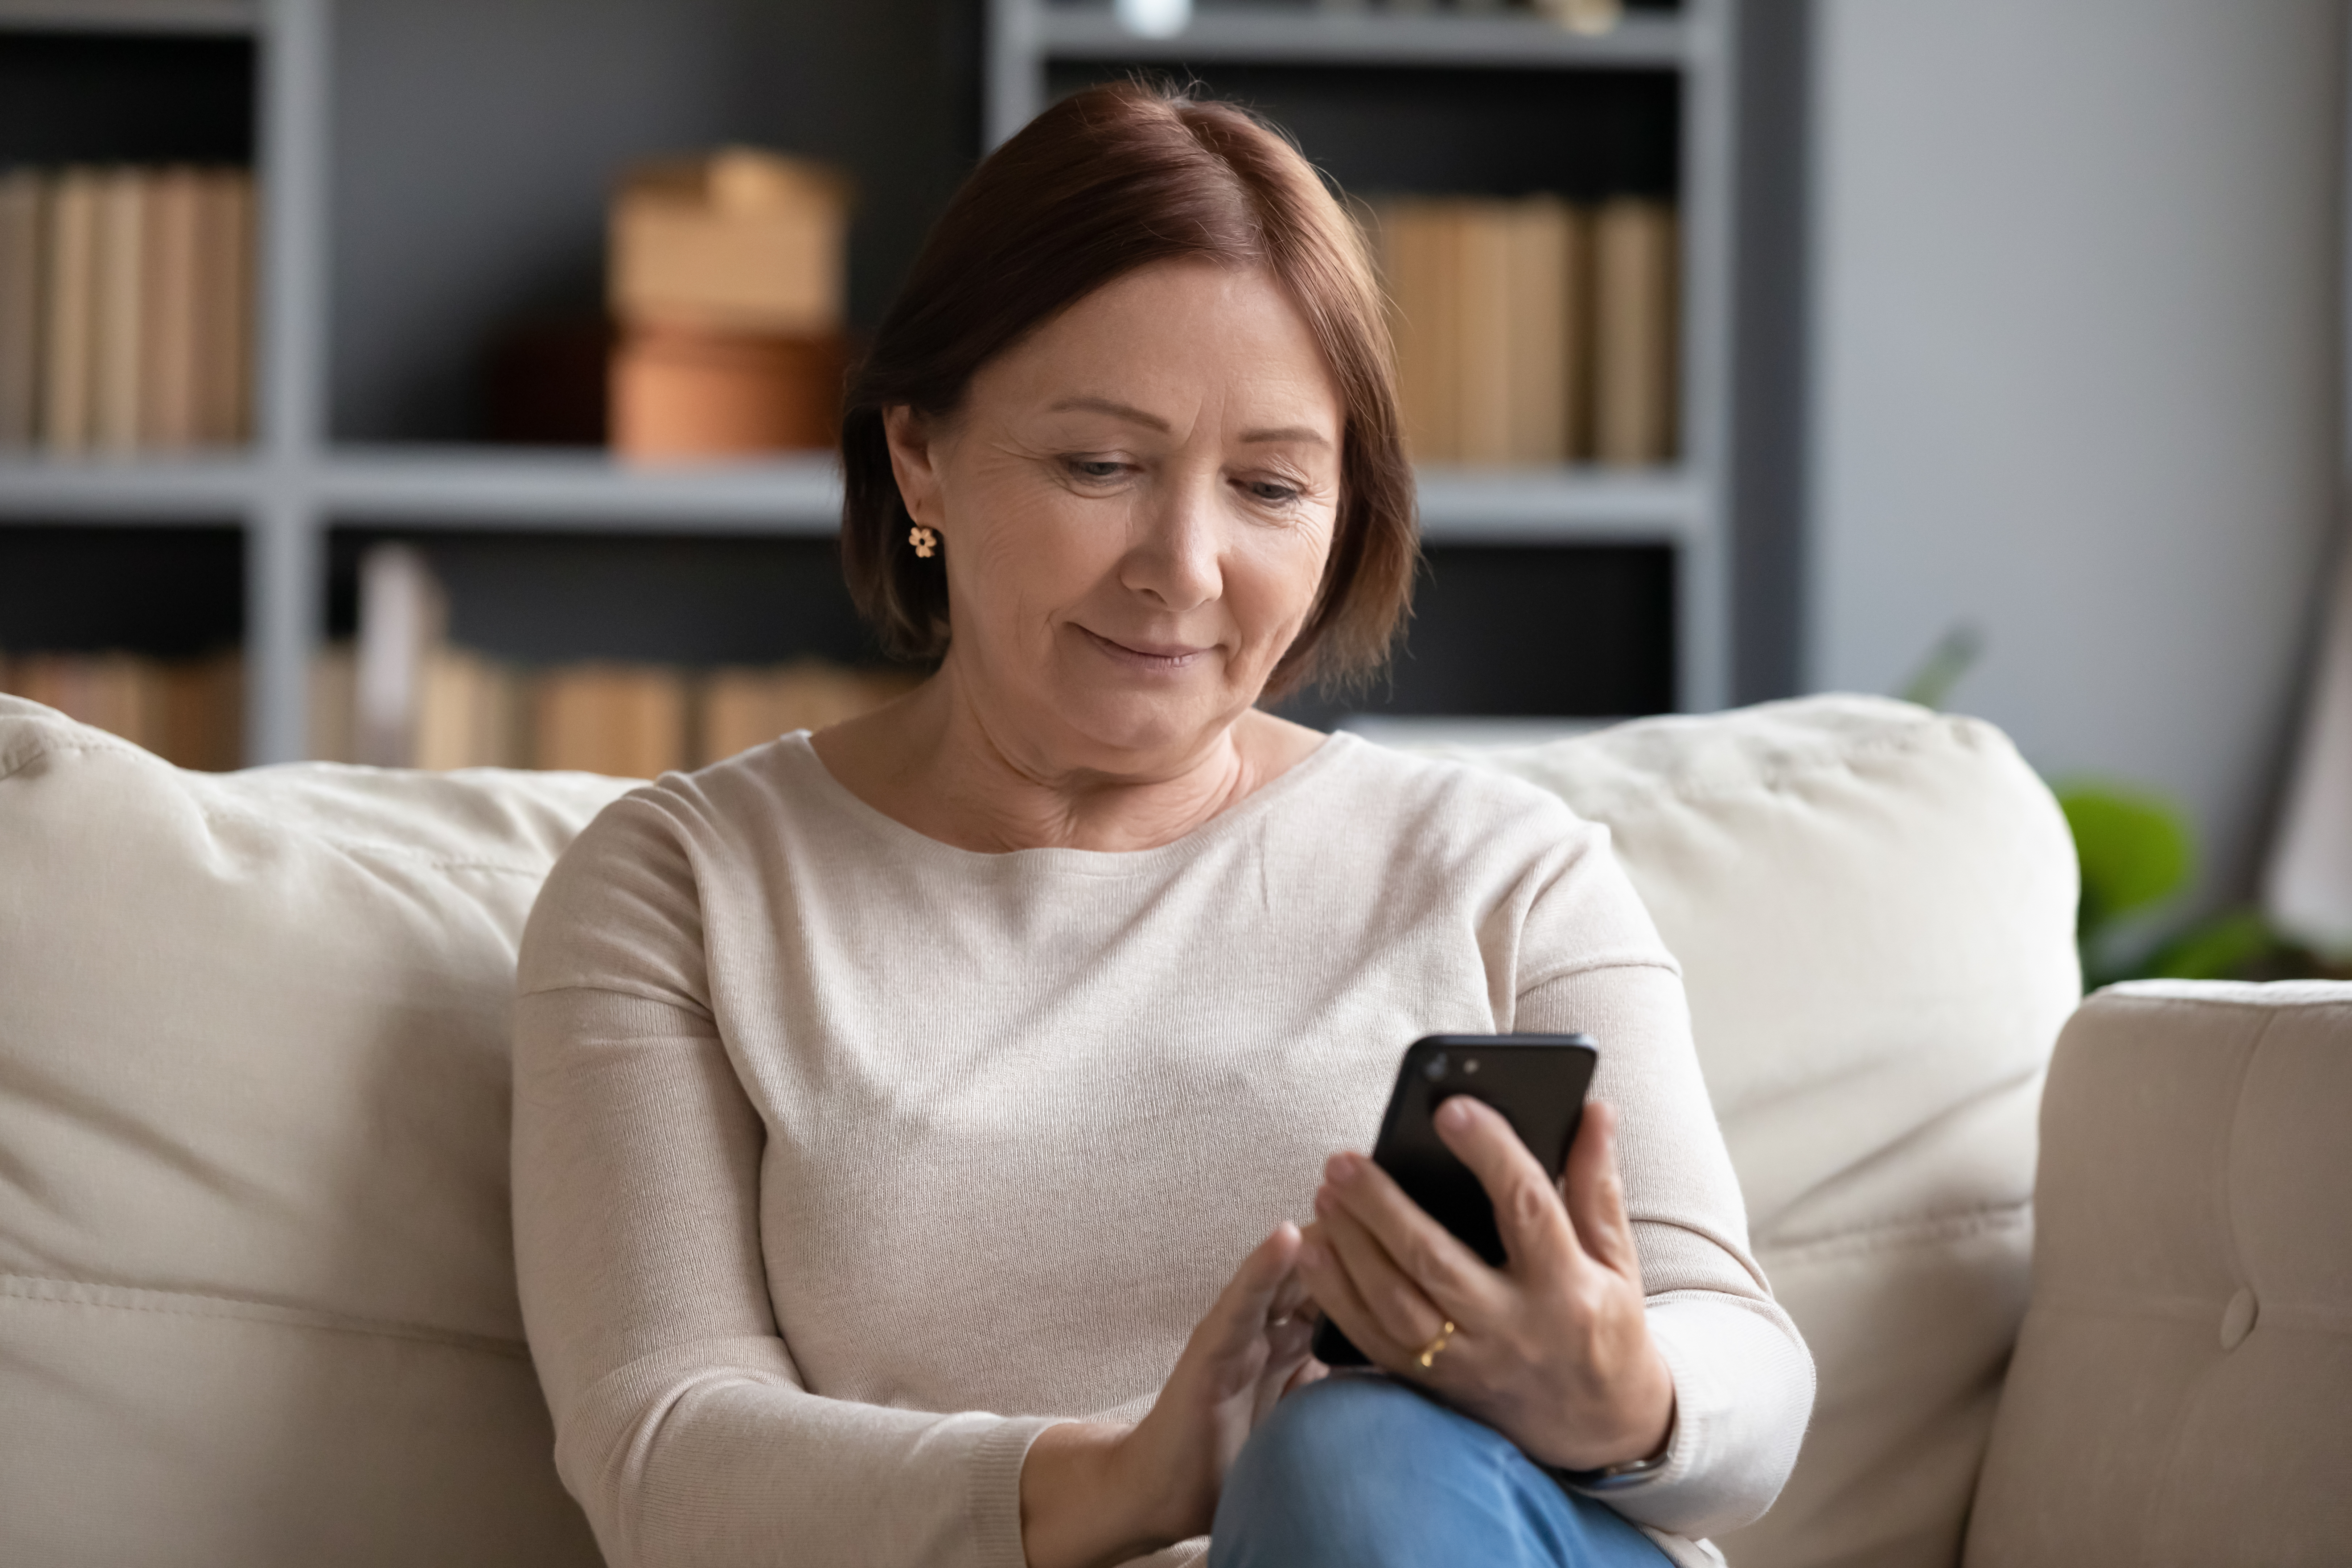 Photograph of a woman on a couch looking at a smartphone.